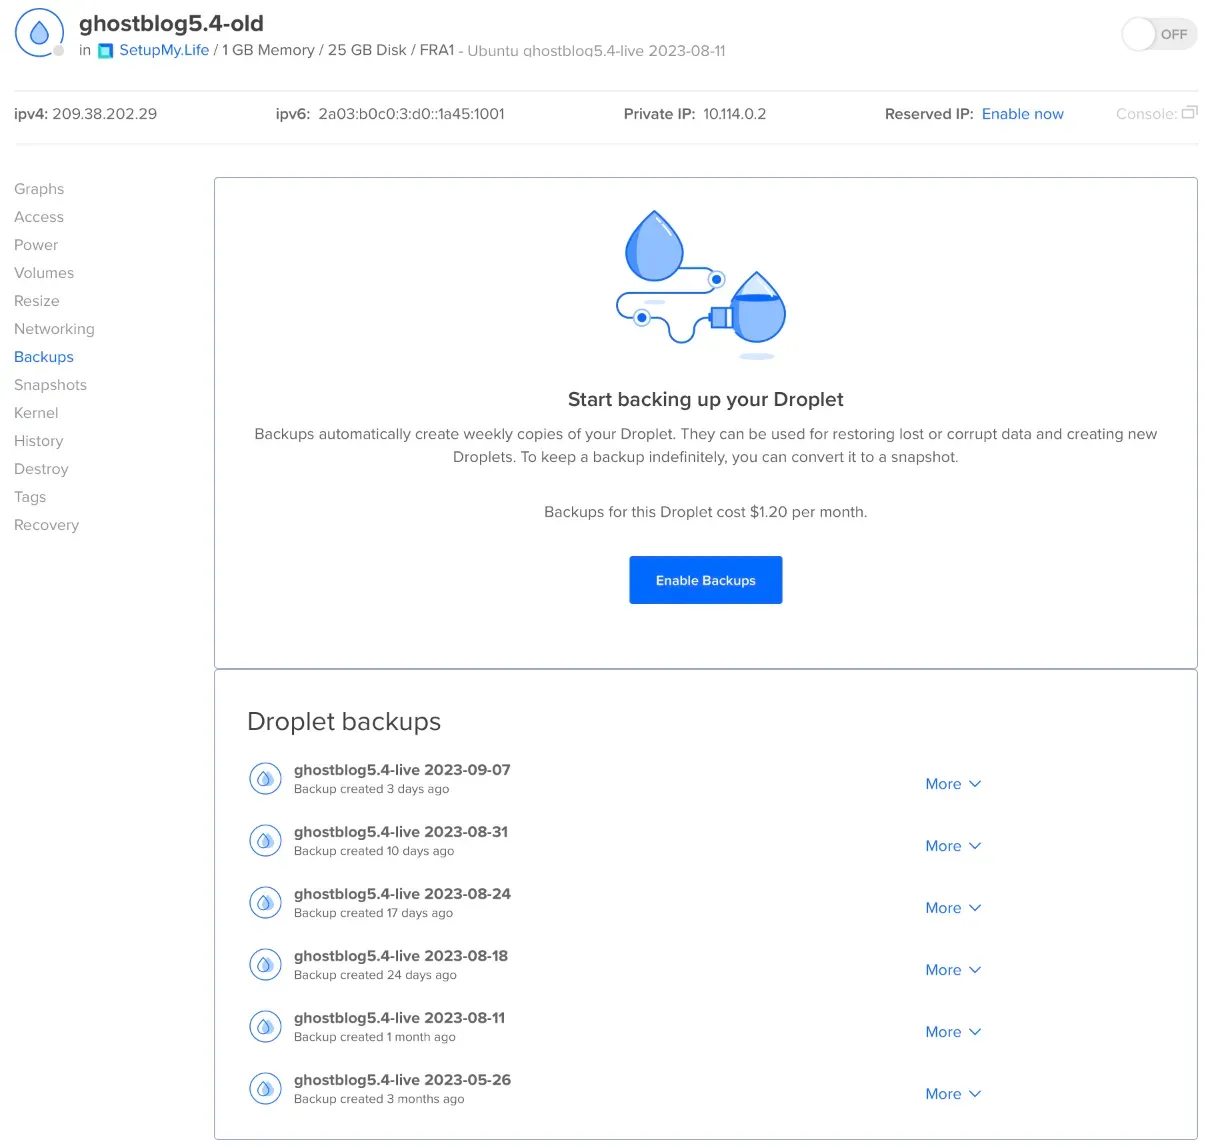 How to Safeguard Your DigitalOcean Droplet: A Backup Guide